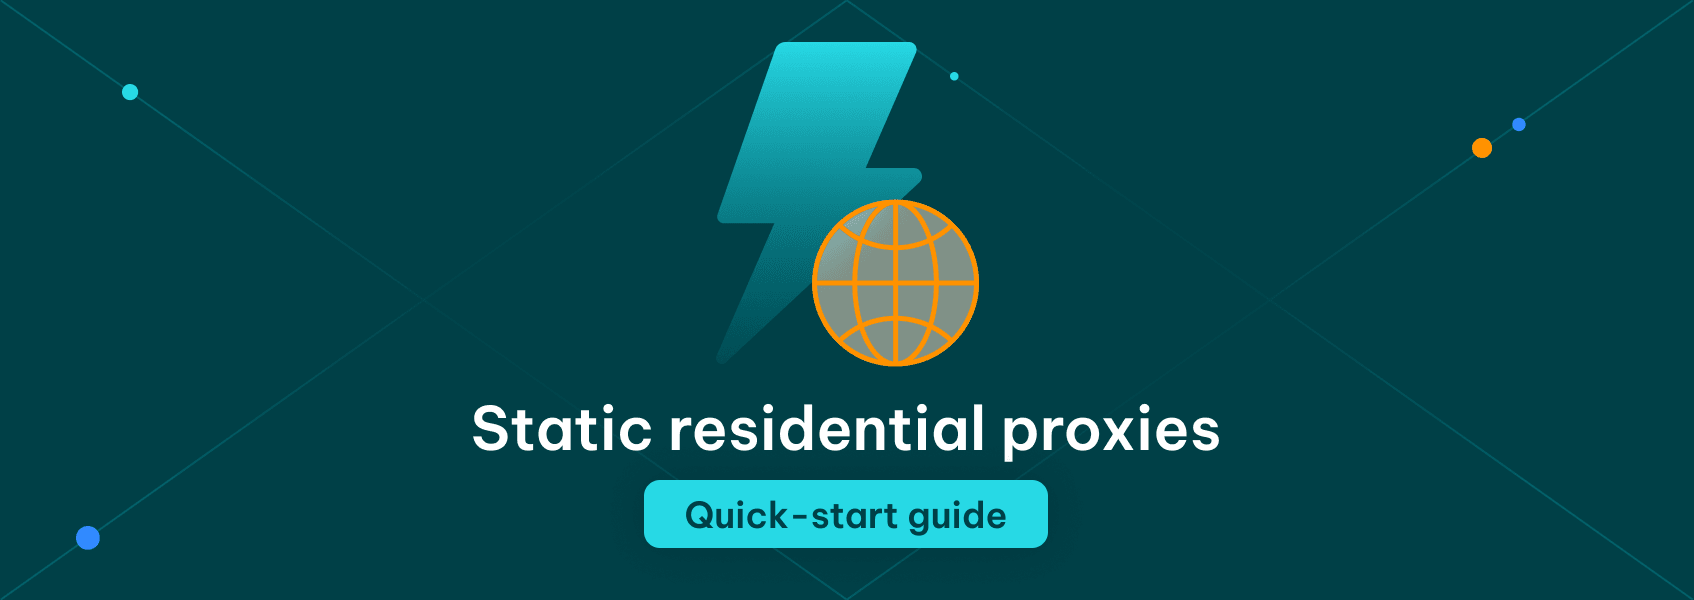 static residential proxies quick-start guide featured